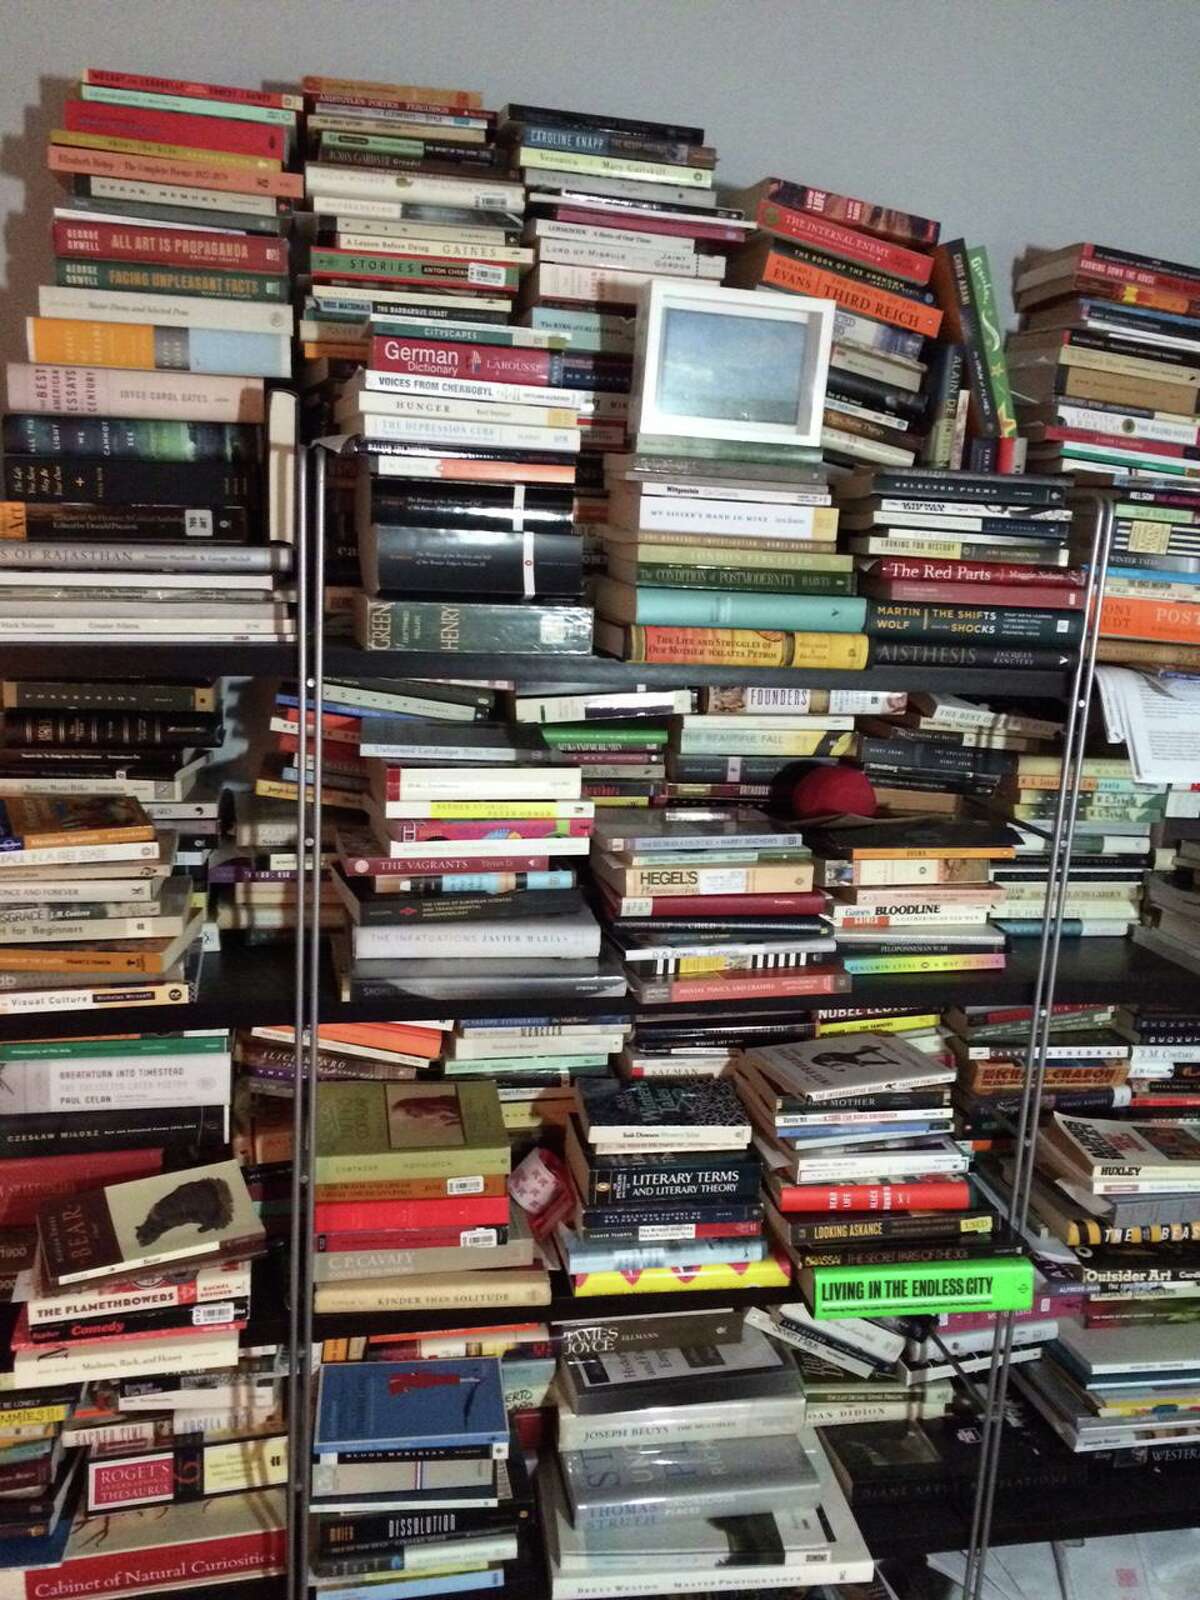 Shelves filled with books are much harder to manage than a Kindle Fire. De-clutter!